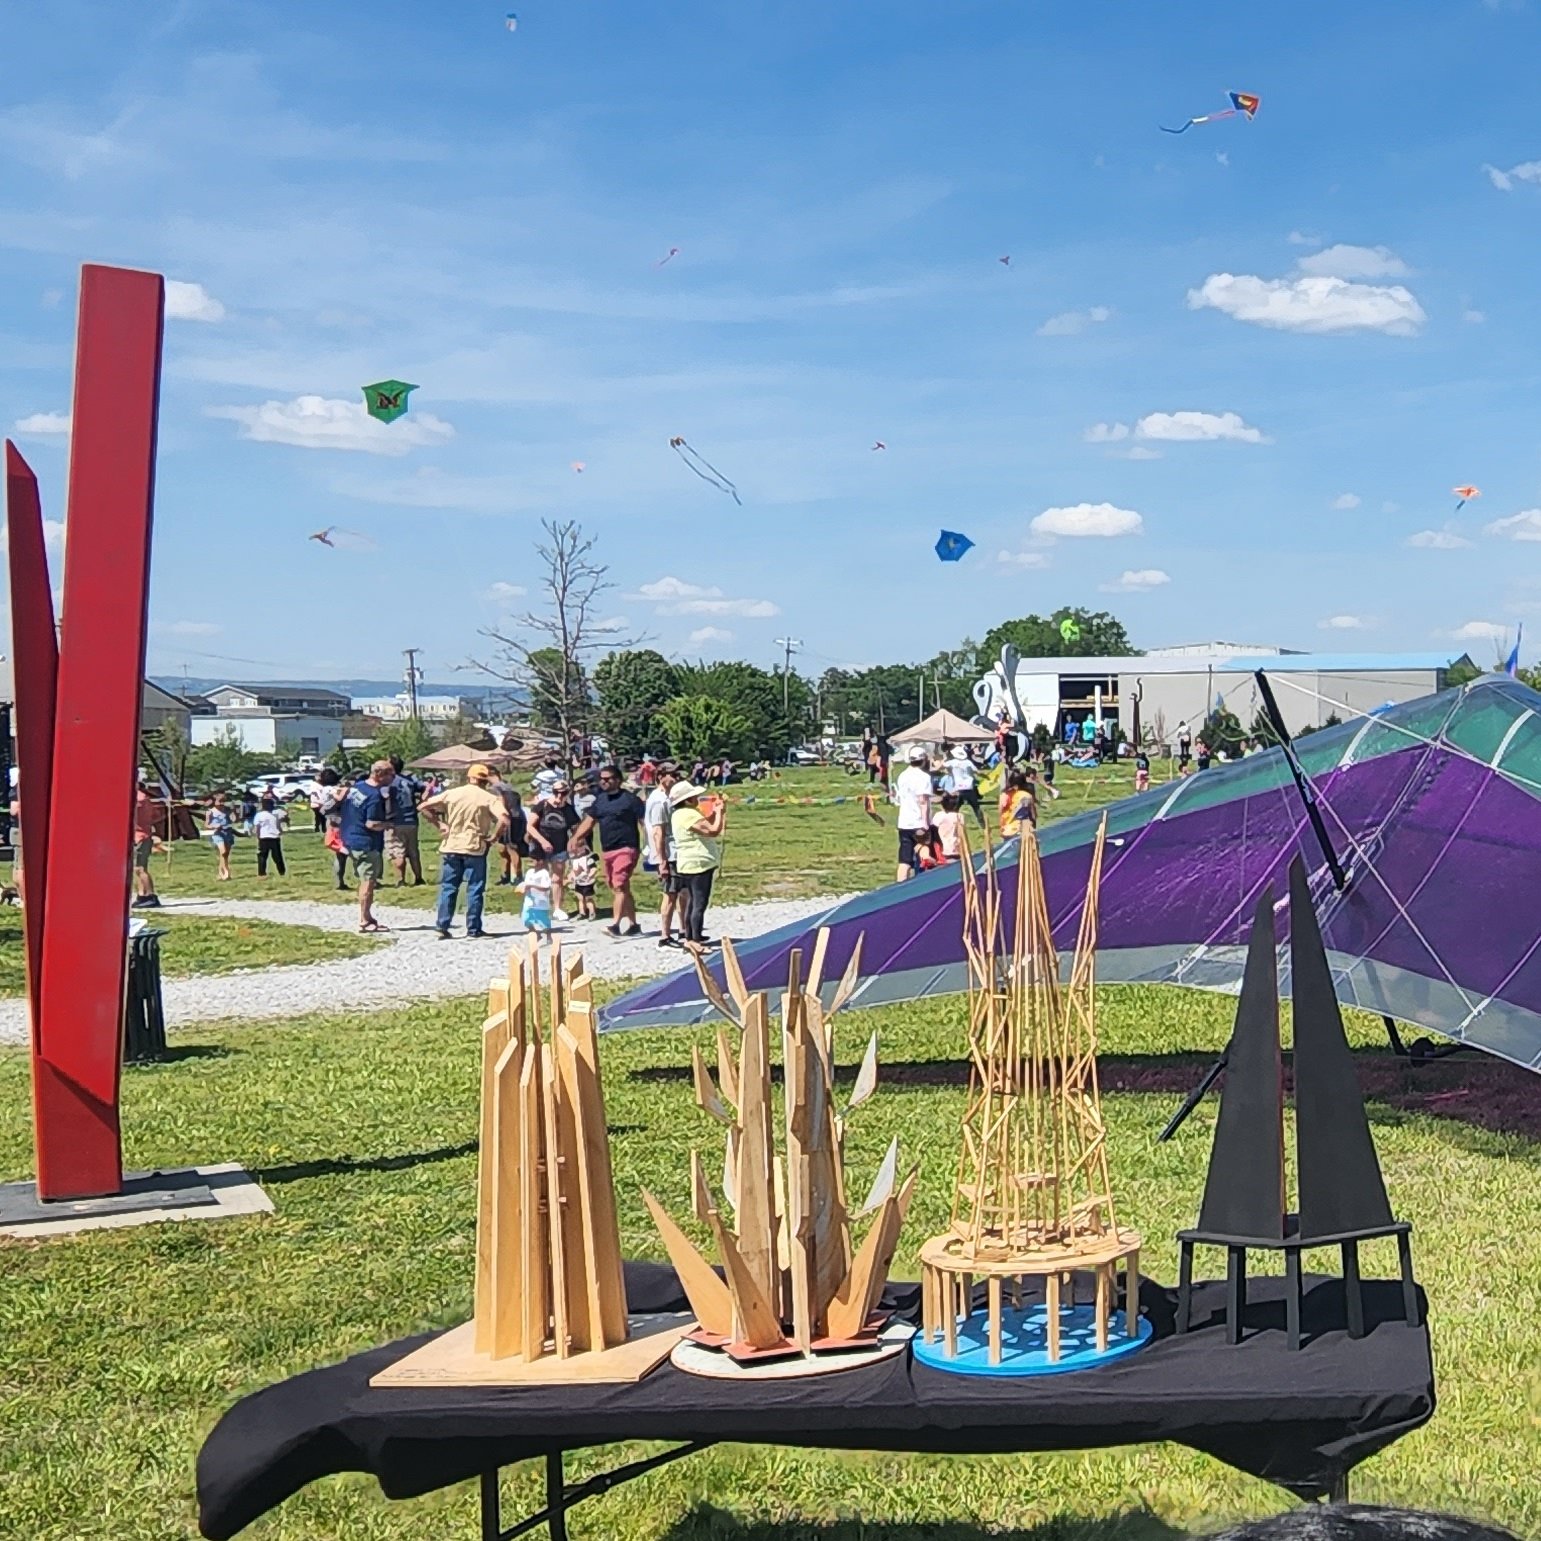 Chattanooga was recently named 50 best places to live in the U.S., noting our outdoors, arts scene &amp; festivals as top reasons. Well, WE HAVE IT ALL! Outdoors + art + festival = Sculptures In The Sky this Saturday 12-5pm. Family friendly. Free adm